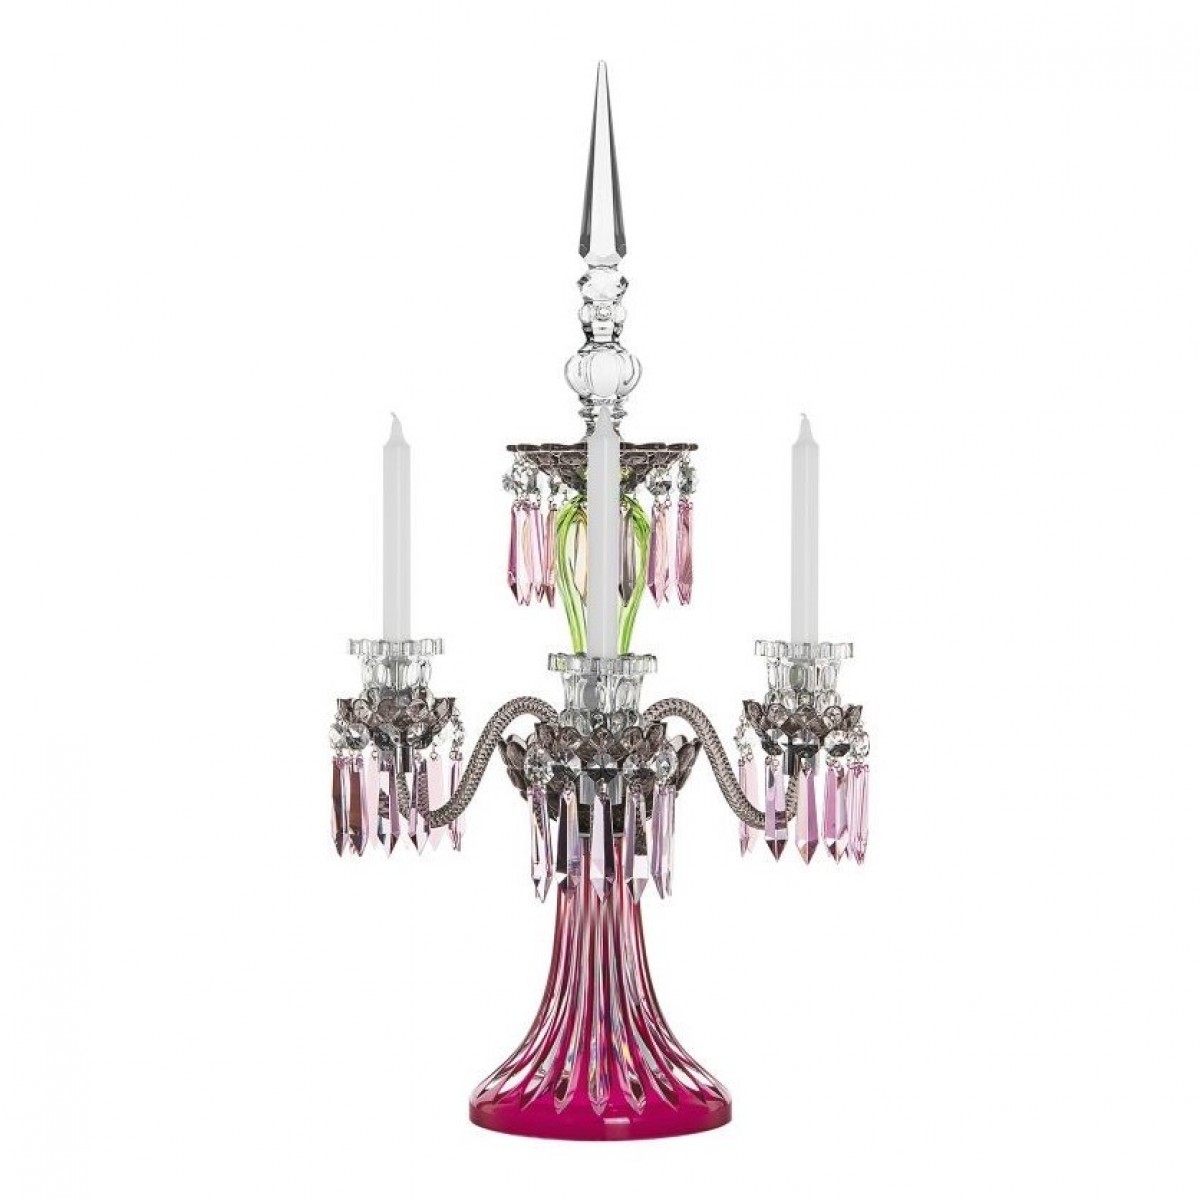 Arlequin 3-Candle Candelabra - Amethyst, Chartreuse-Green and Flannel-grey